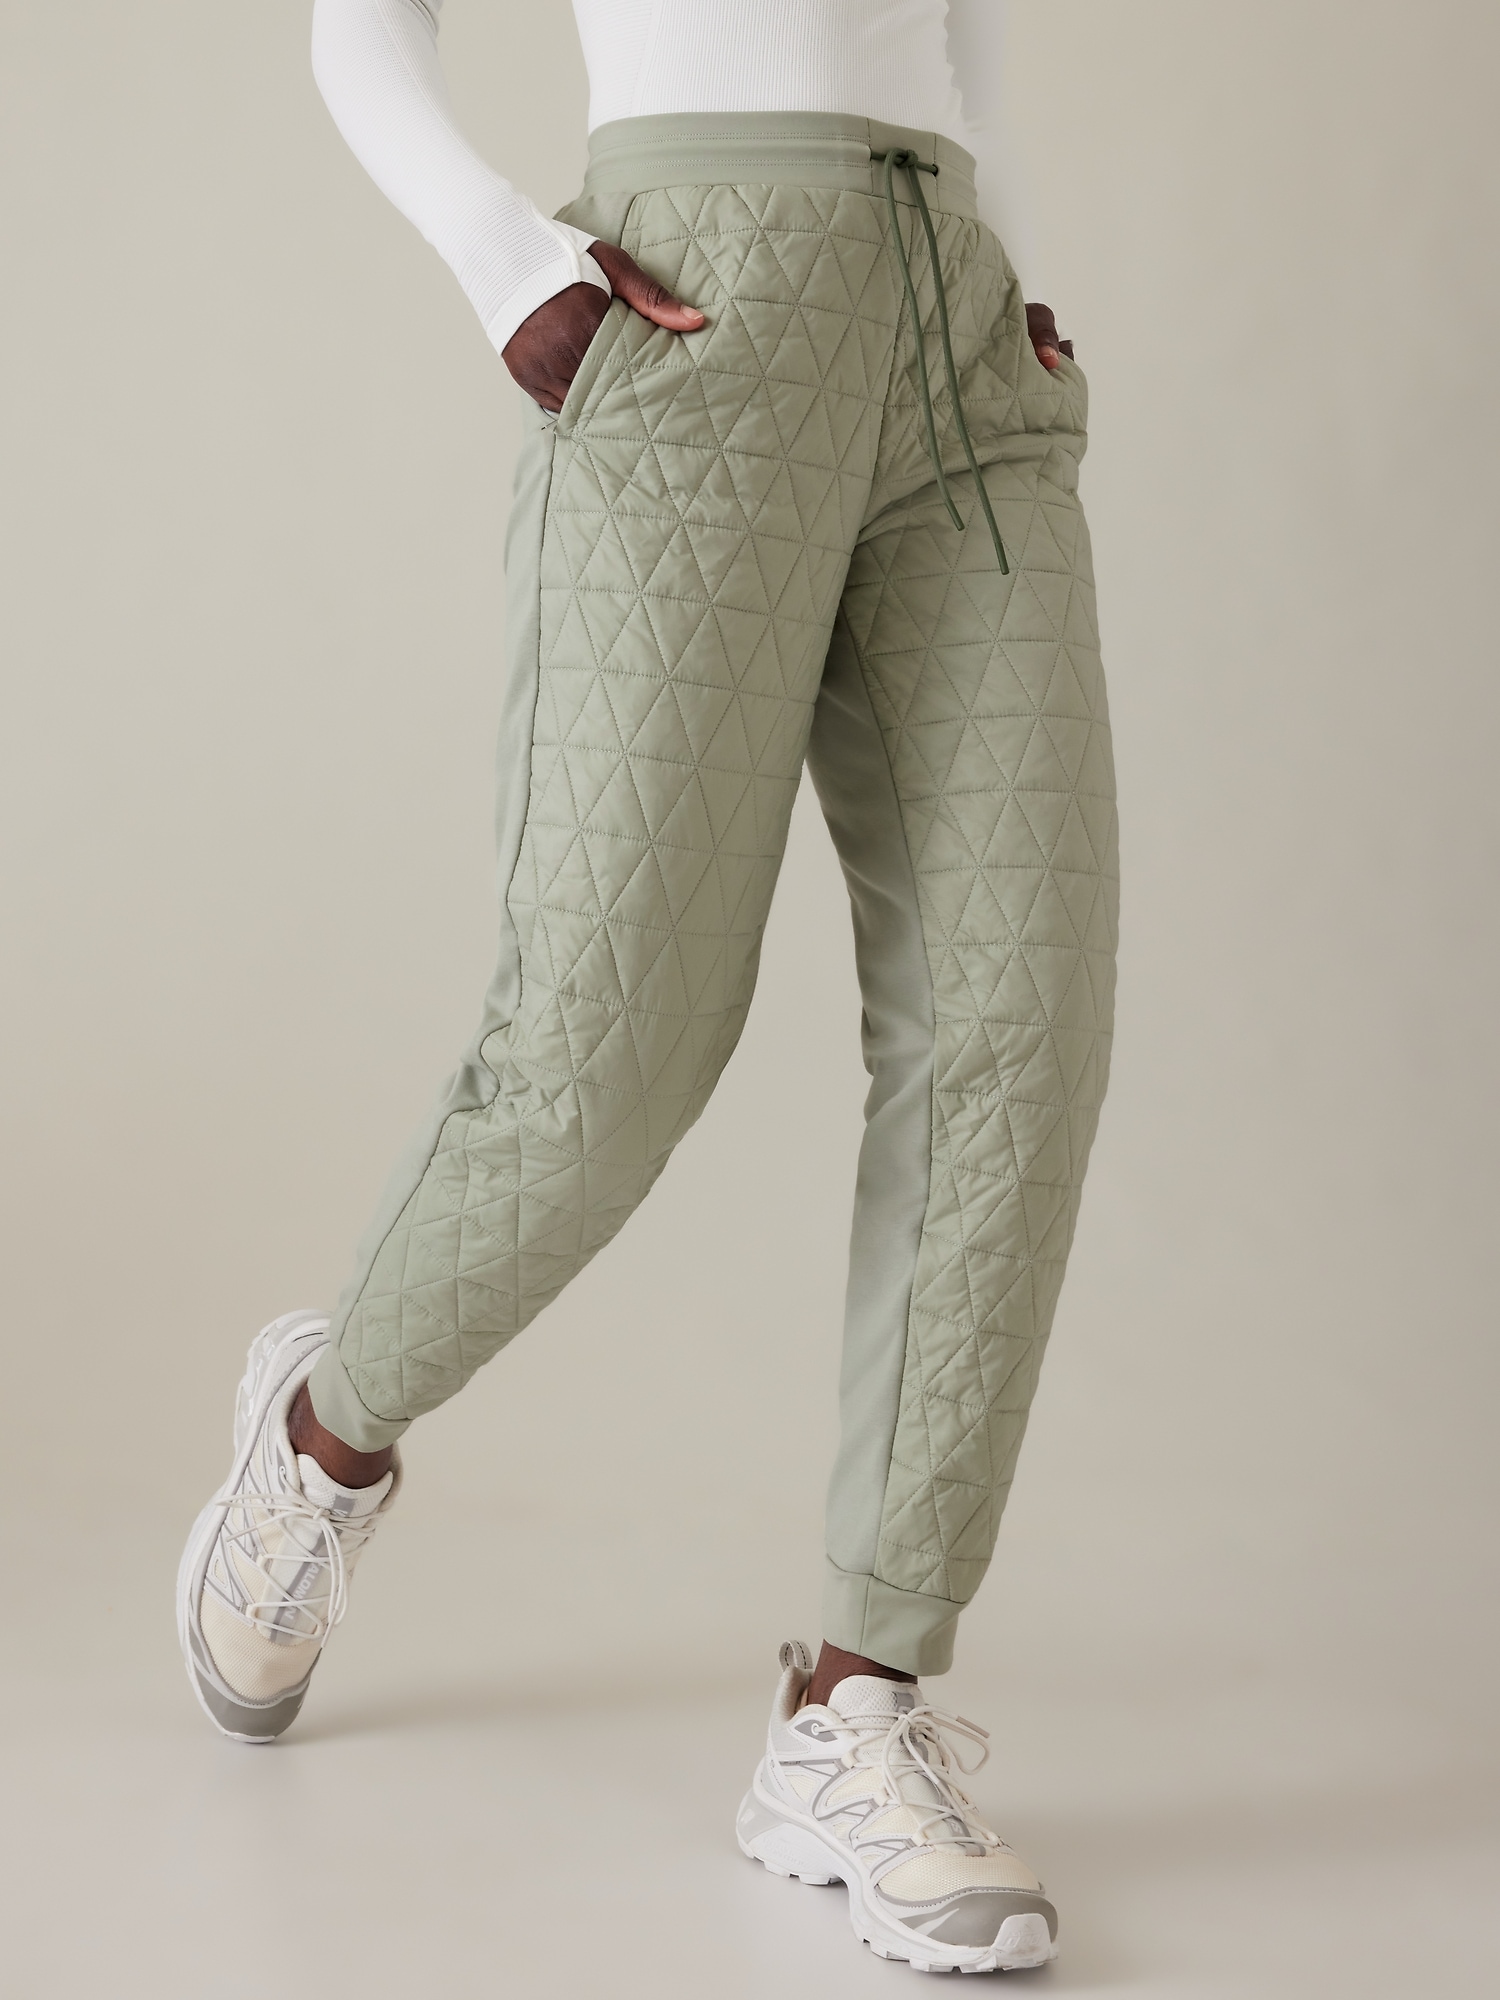 A Quilted Style: Athleta Apres Ski Down Joggers